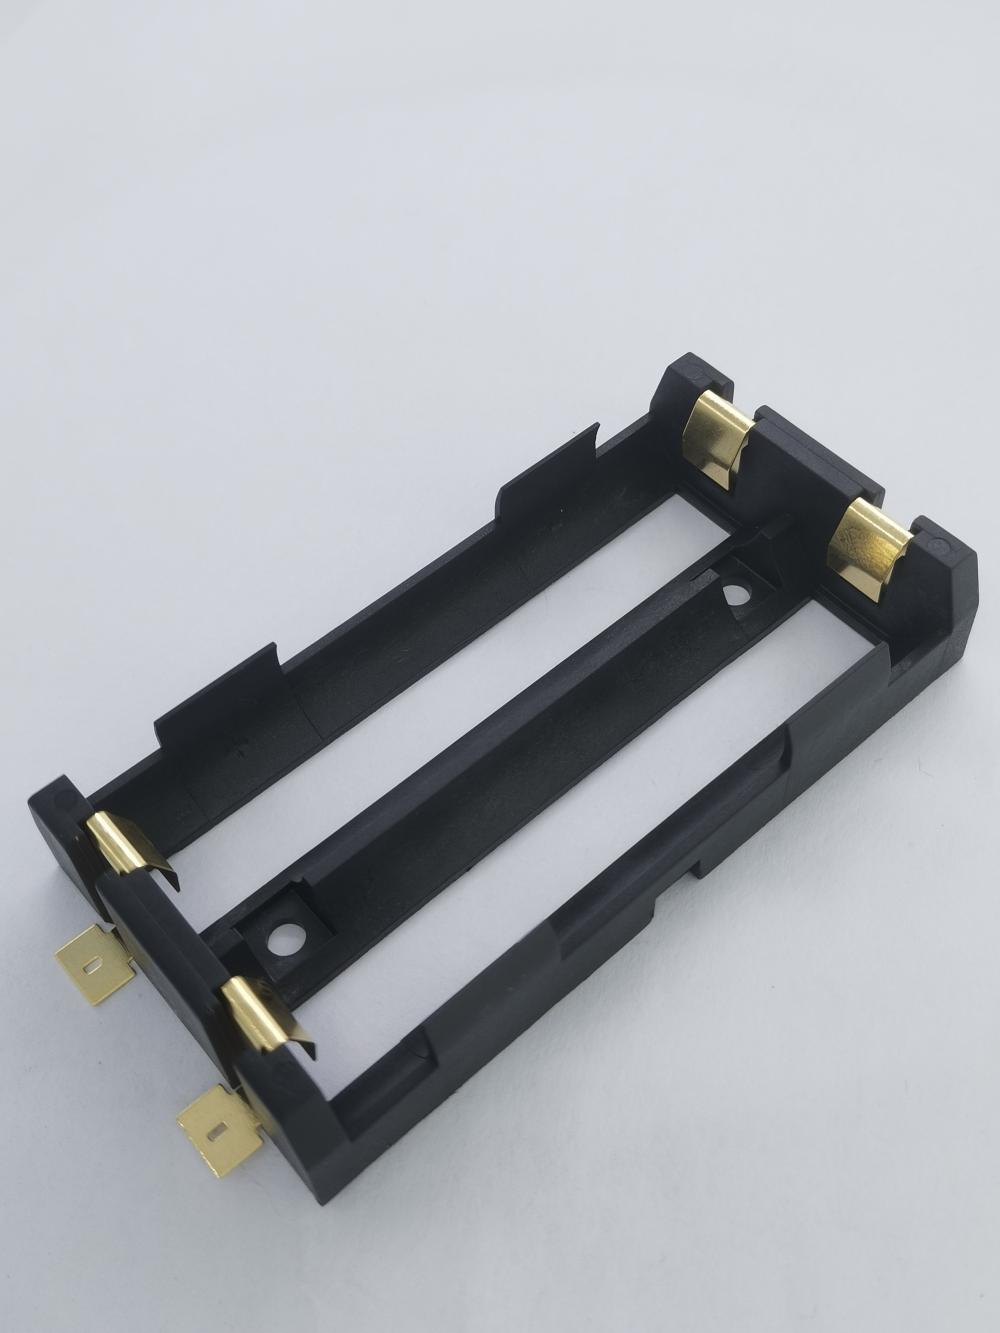 BBC-M-GO-A-18650-048 Dual Battery Holder For 18650 SMT